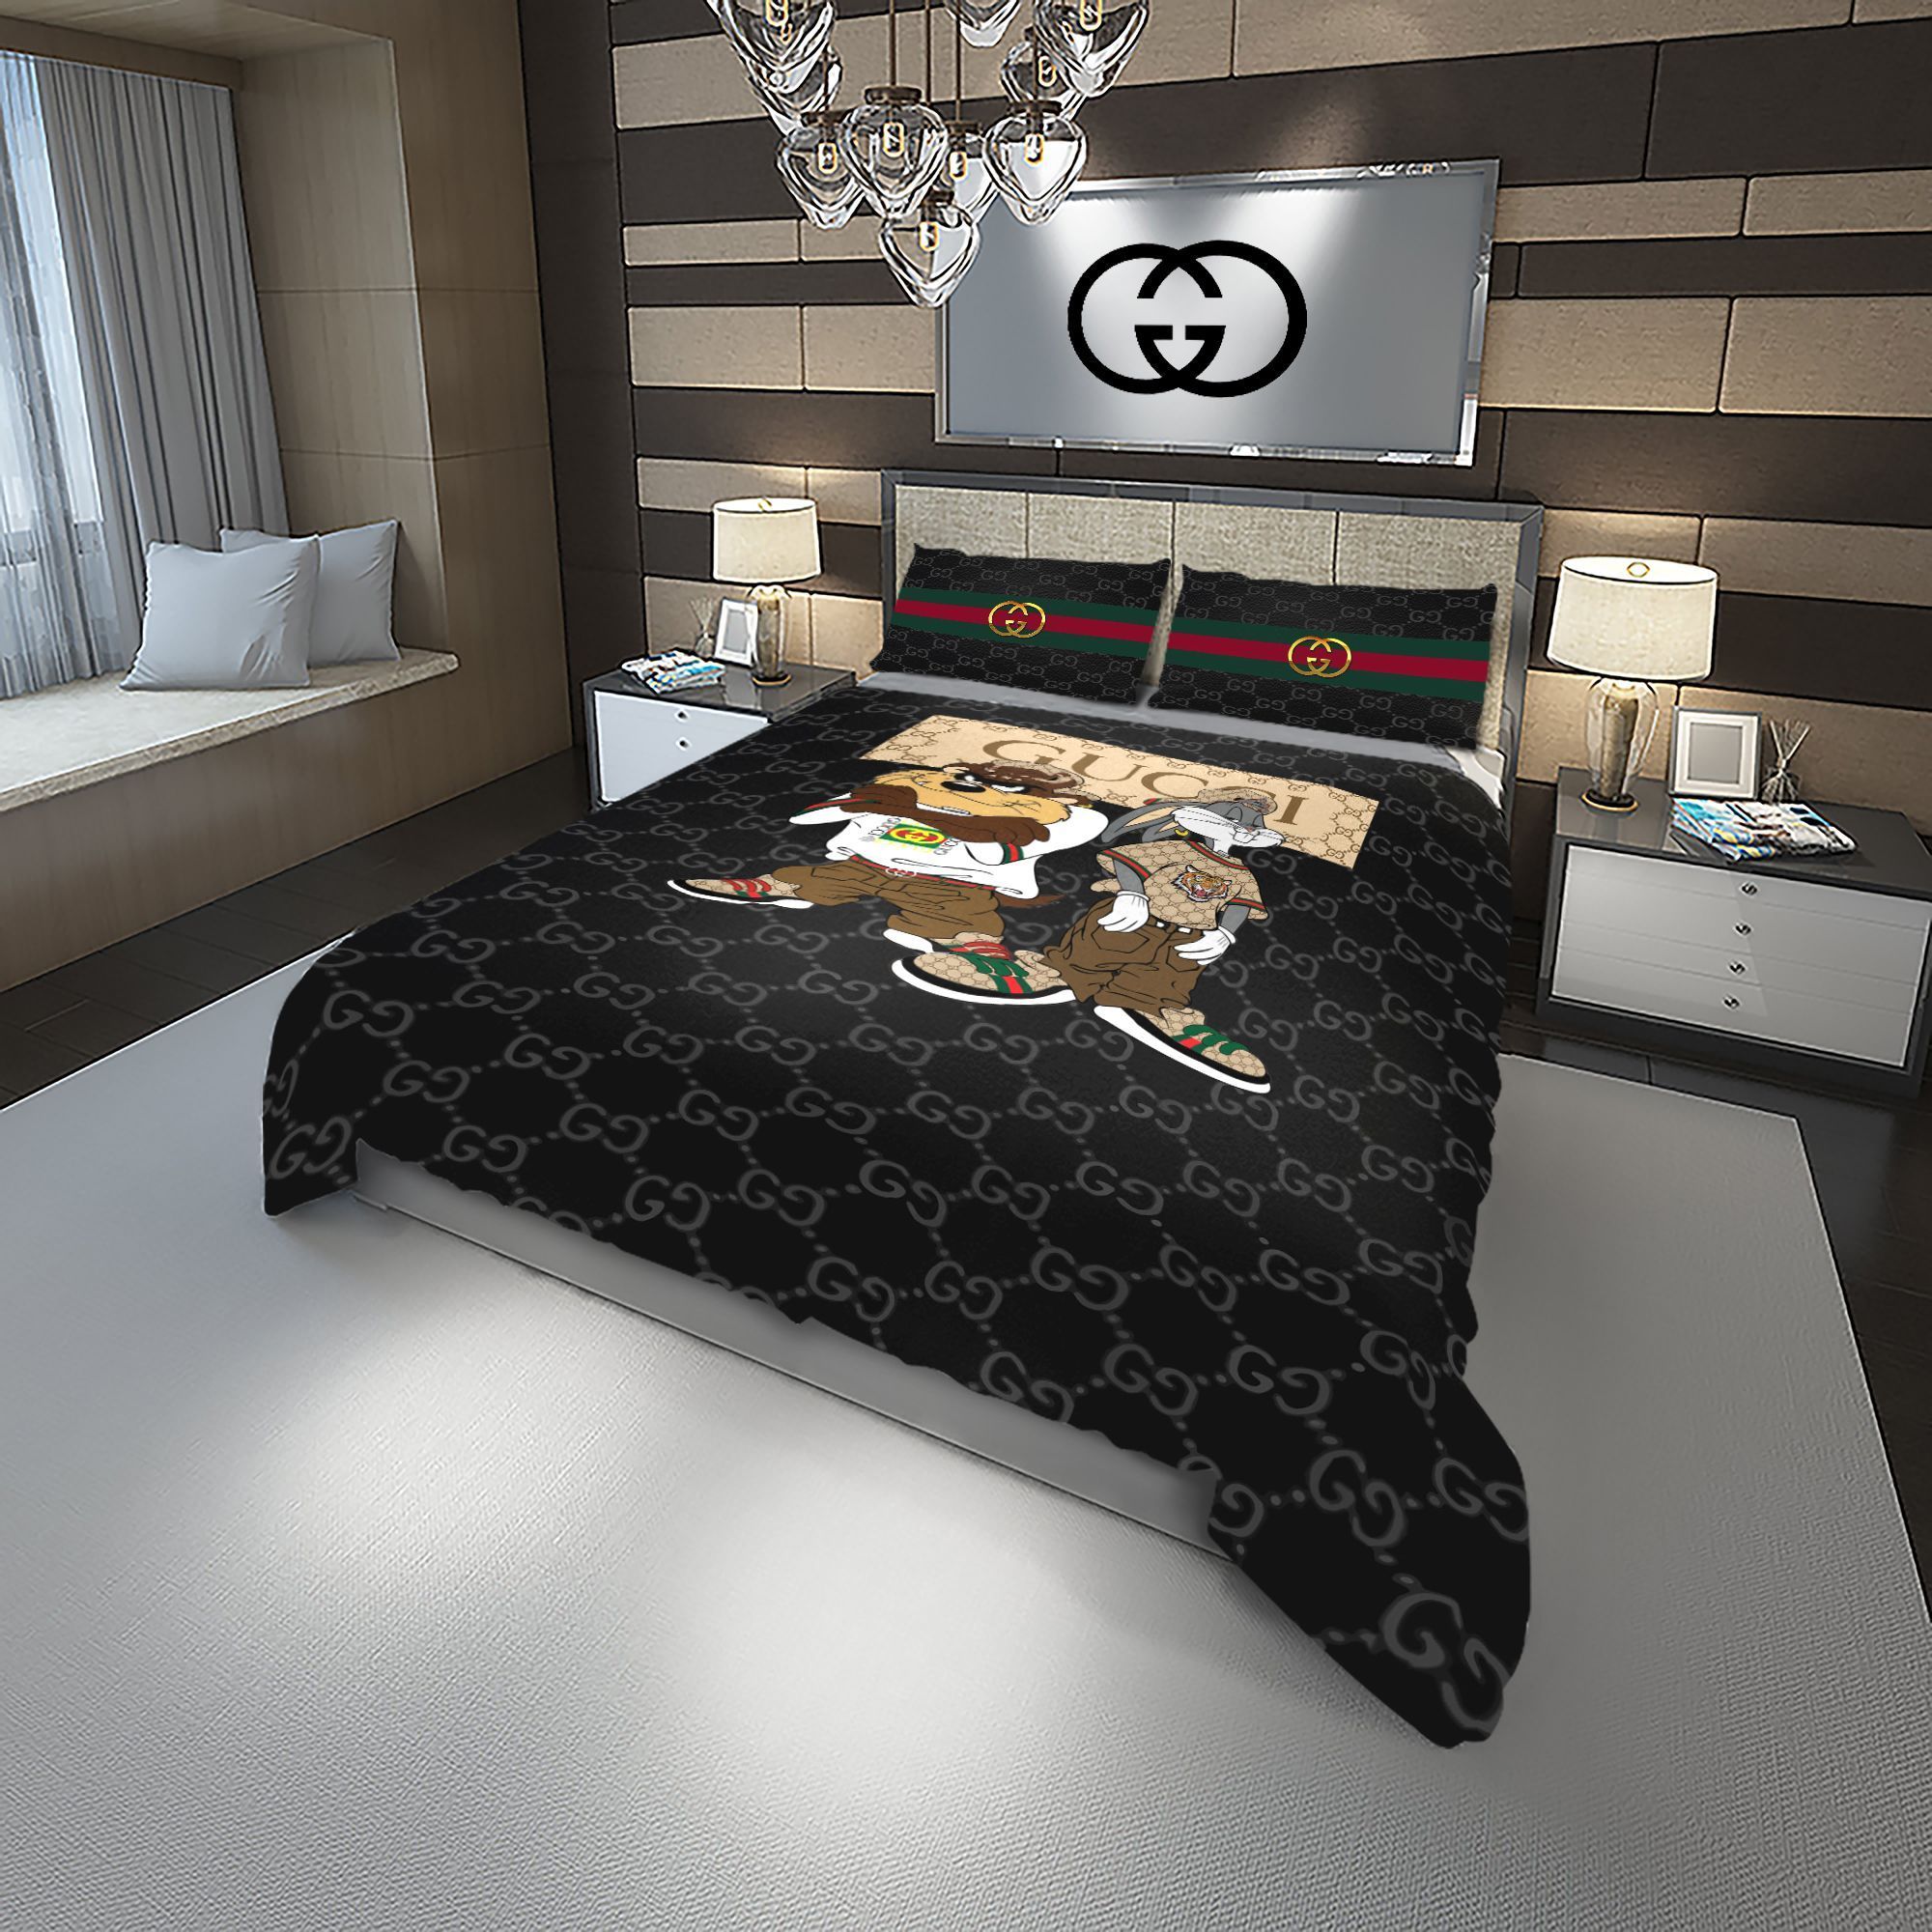 Let me show you about some luxury brand bedding set 2022 173